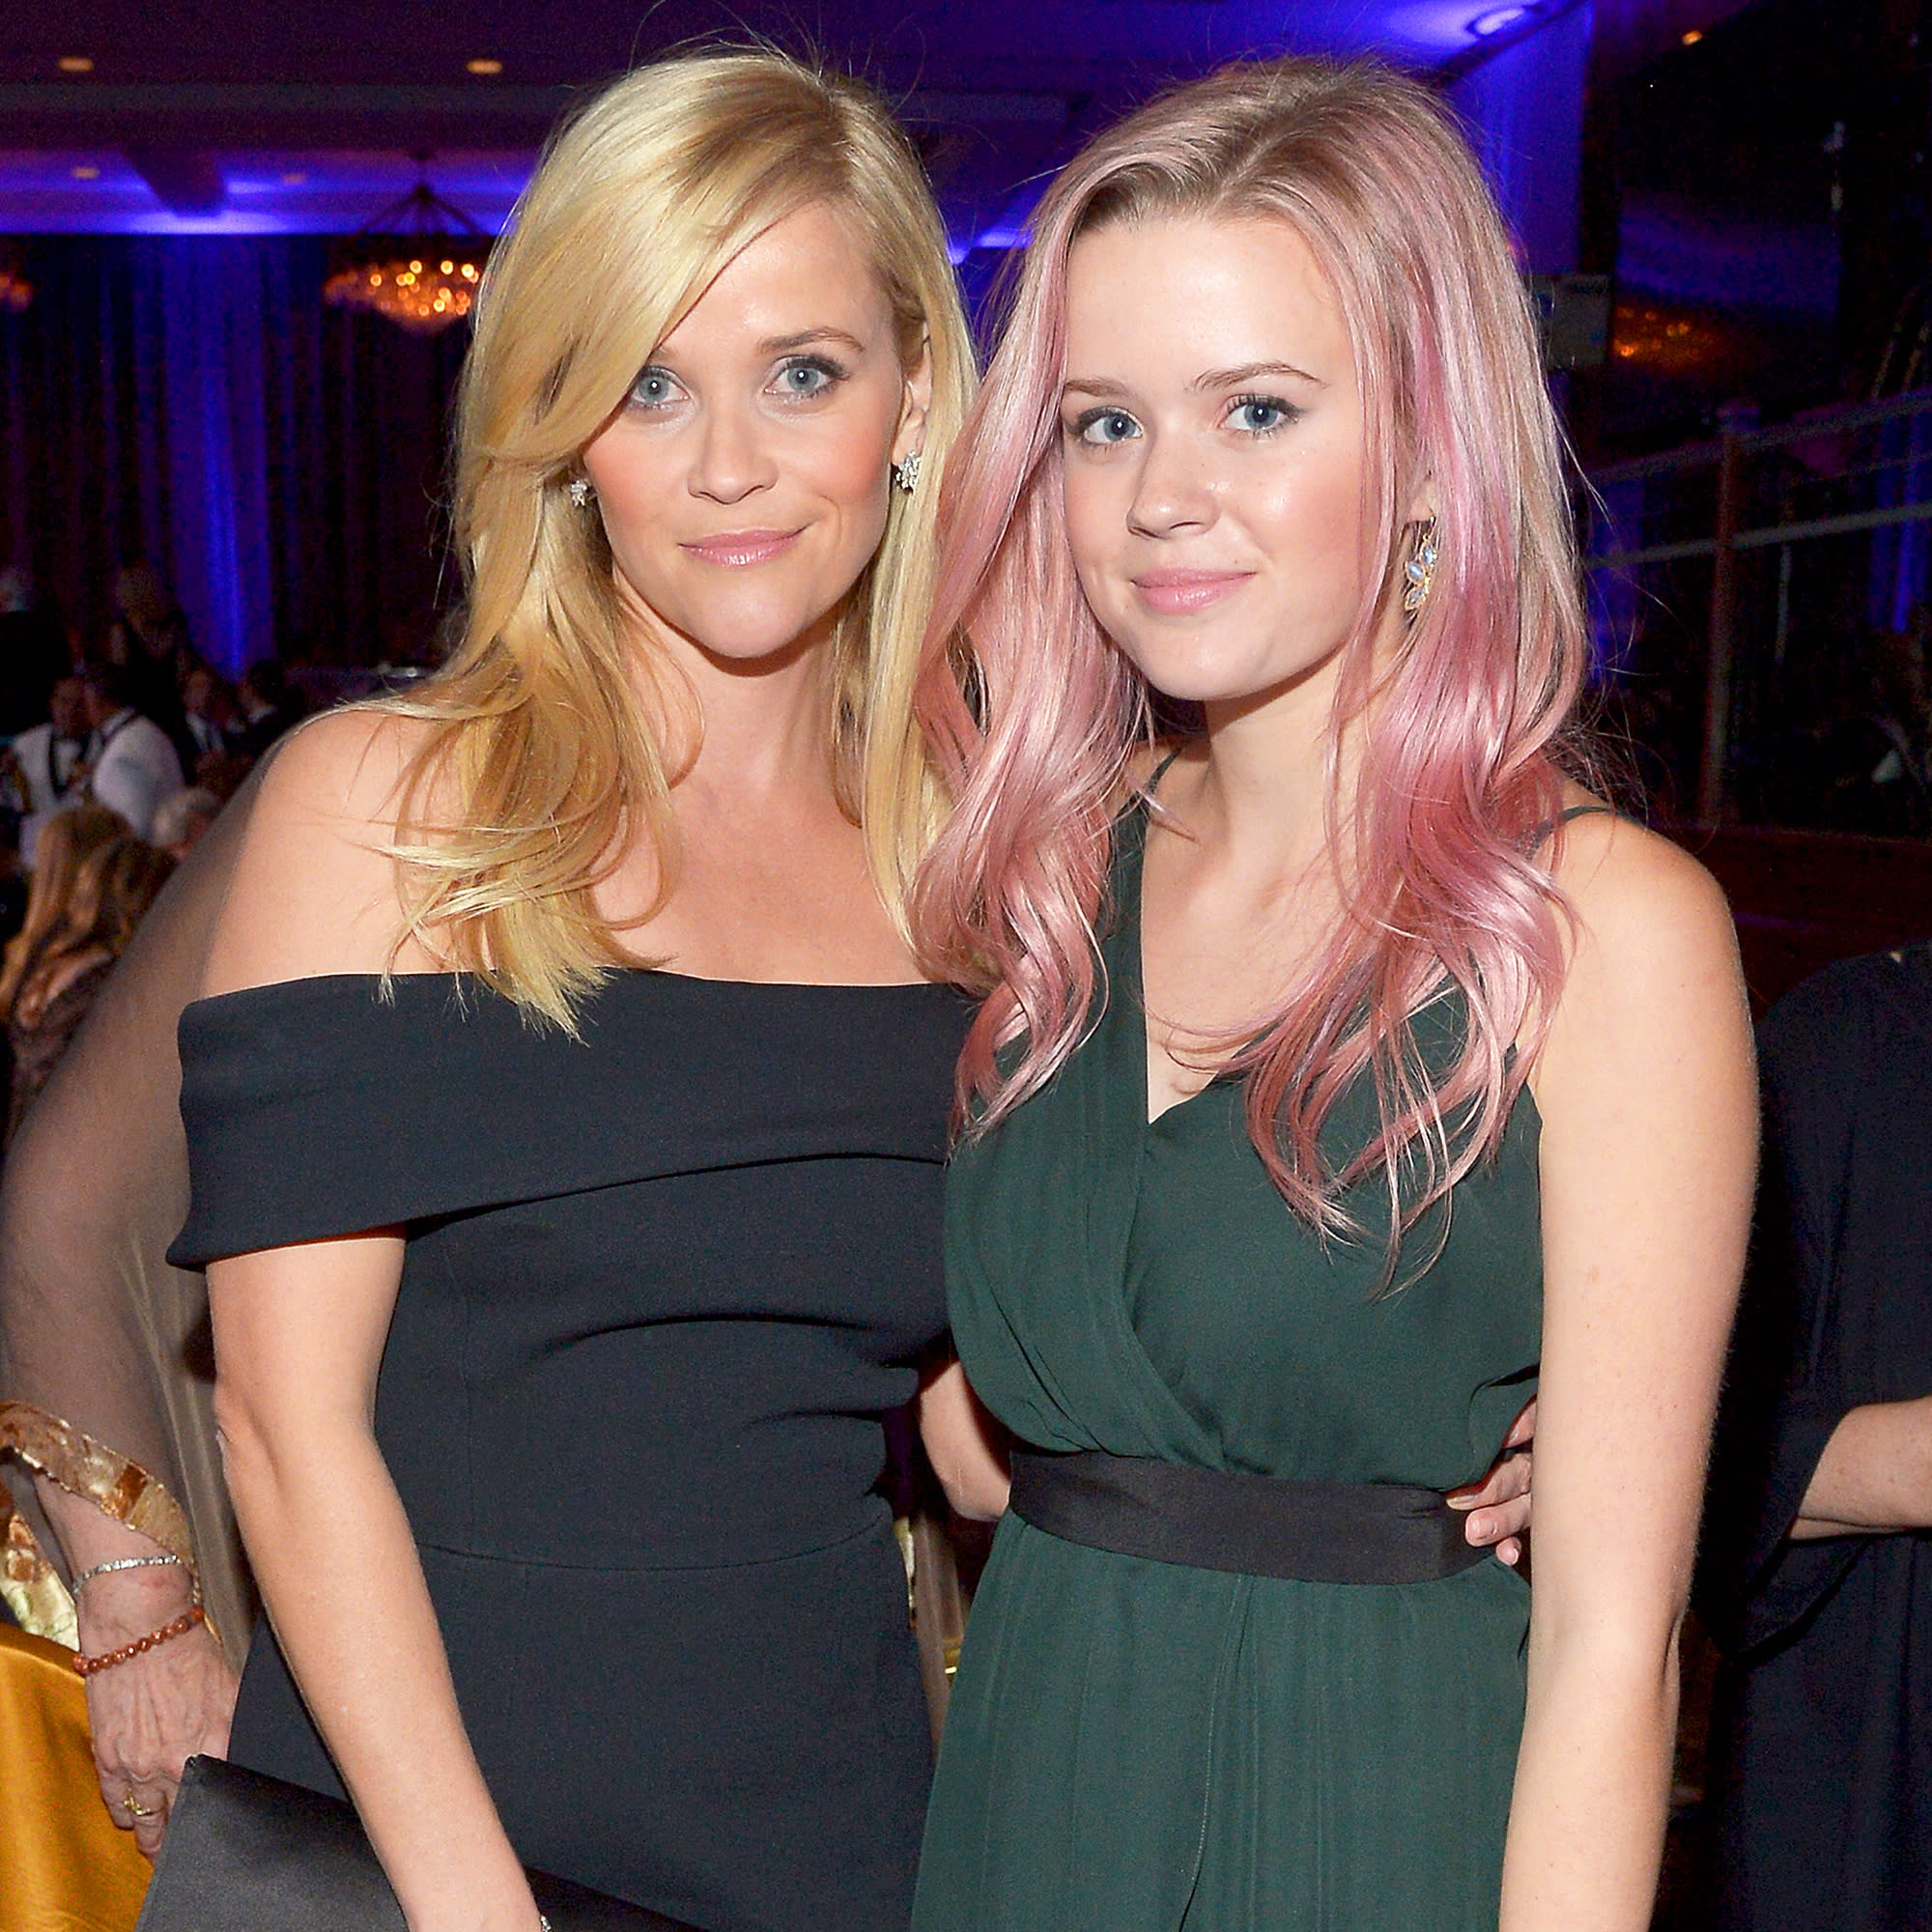 Reese Witherspoon Ryan Phillippes Daughter Ava Just Wants To Be A Normal Teen Drives A Used 